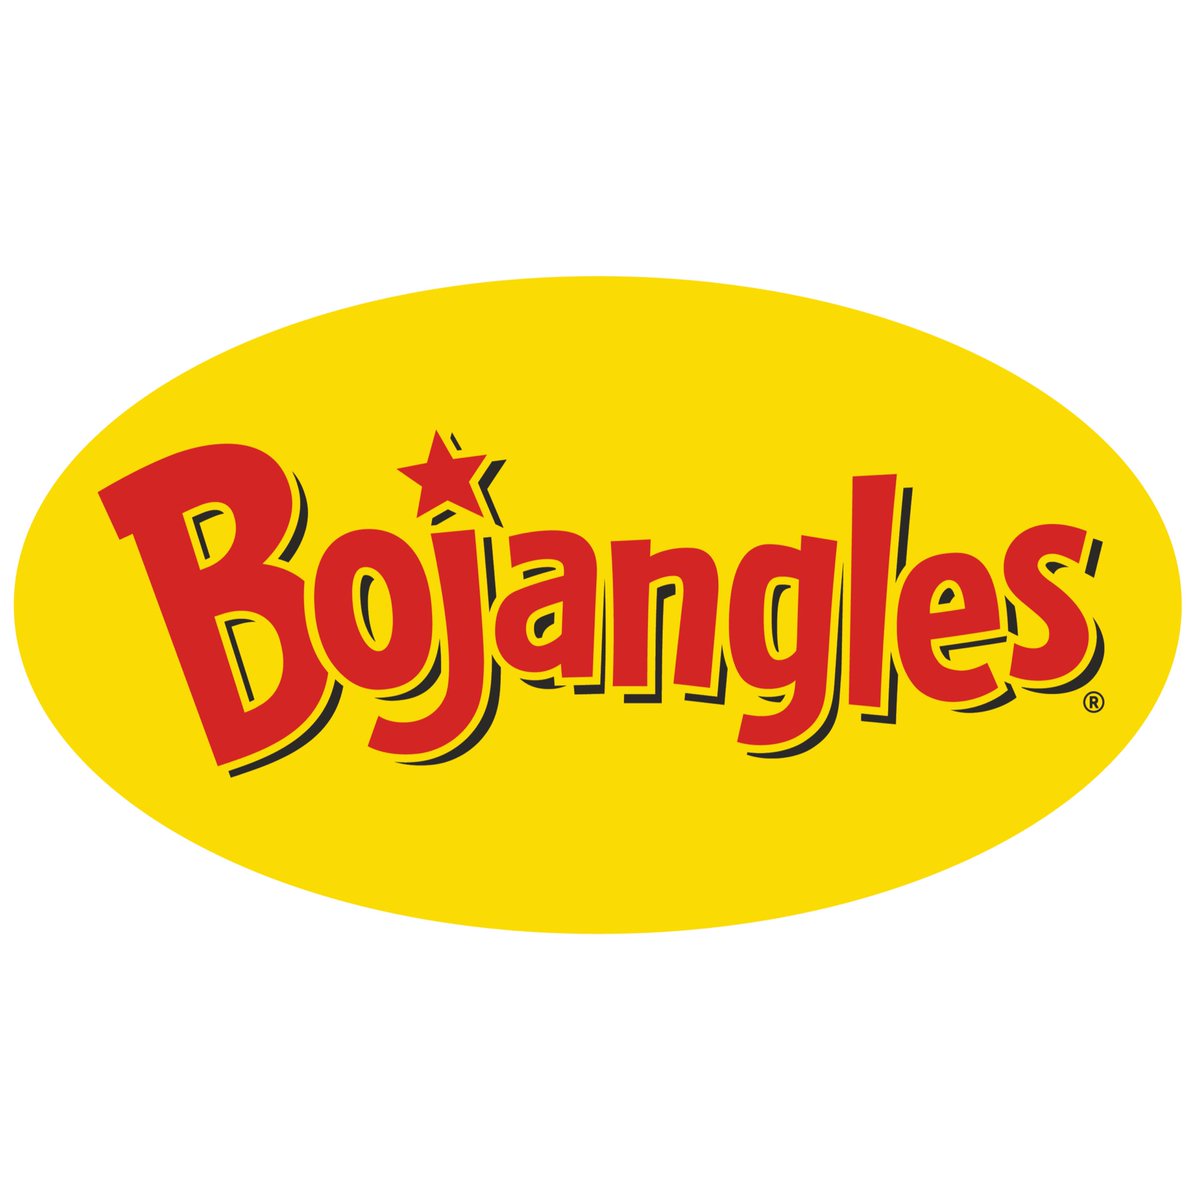 Happy Birthday @Bojangles! 45 years ago today, a new restaurant opened its first location right here in Charlotte… and the rest is history. Congrats to our homegrown sensation, we are so proud of your success. #ItsBoTime